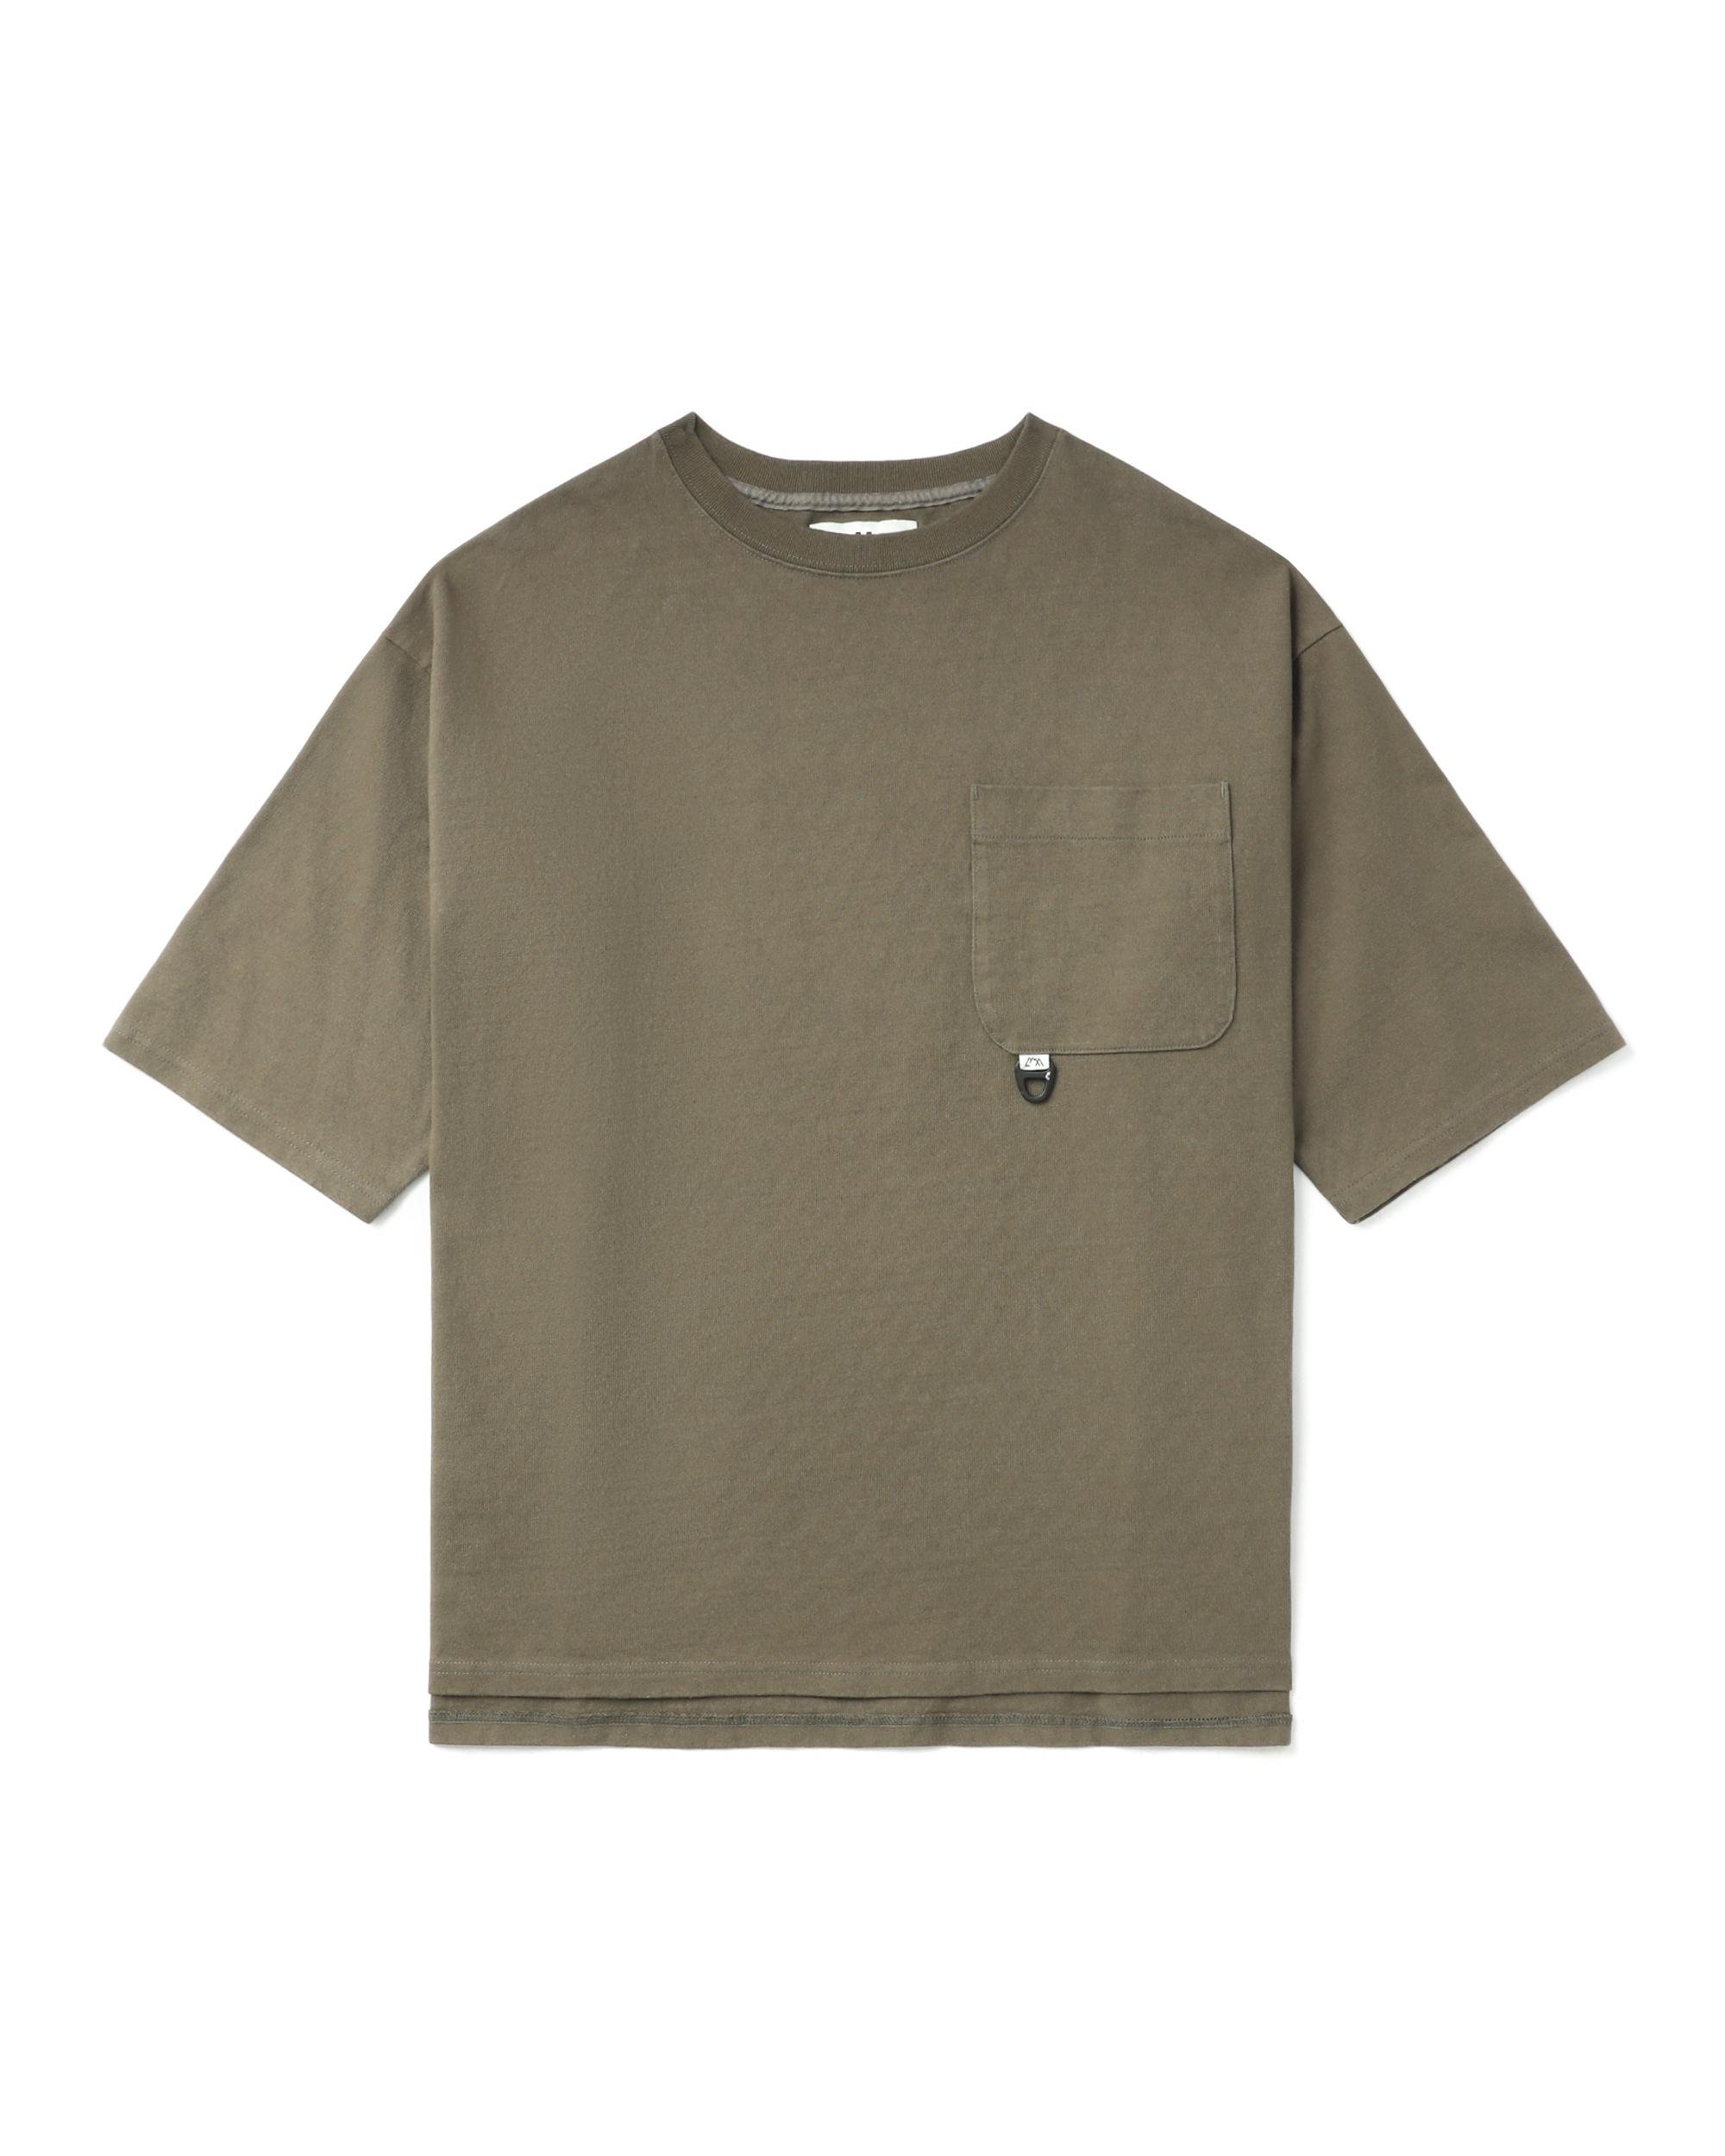 Pocket tee by COMFY OUTDOOR GARMENT